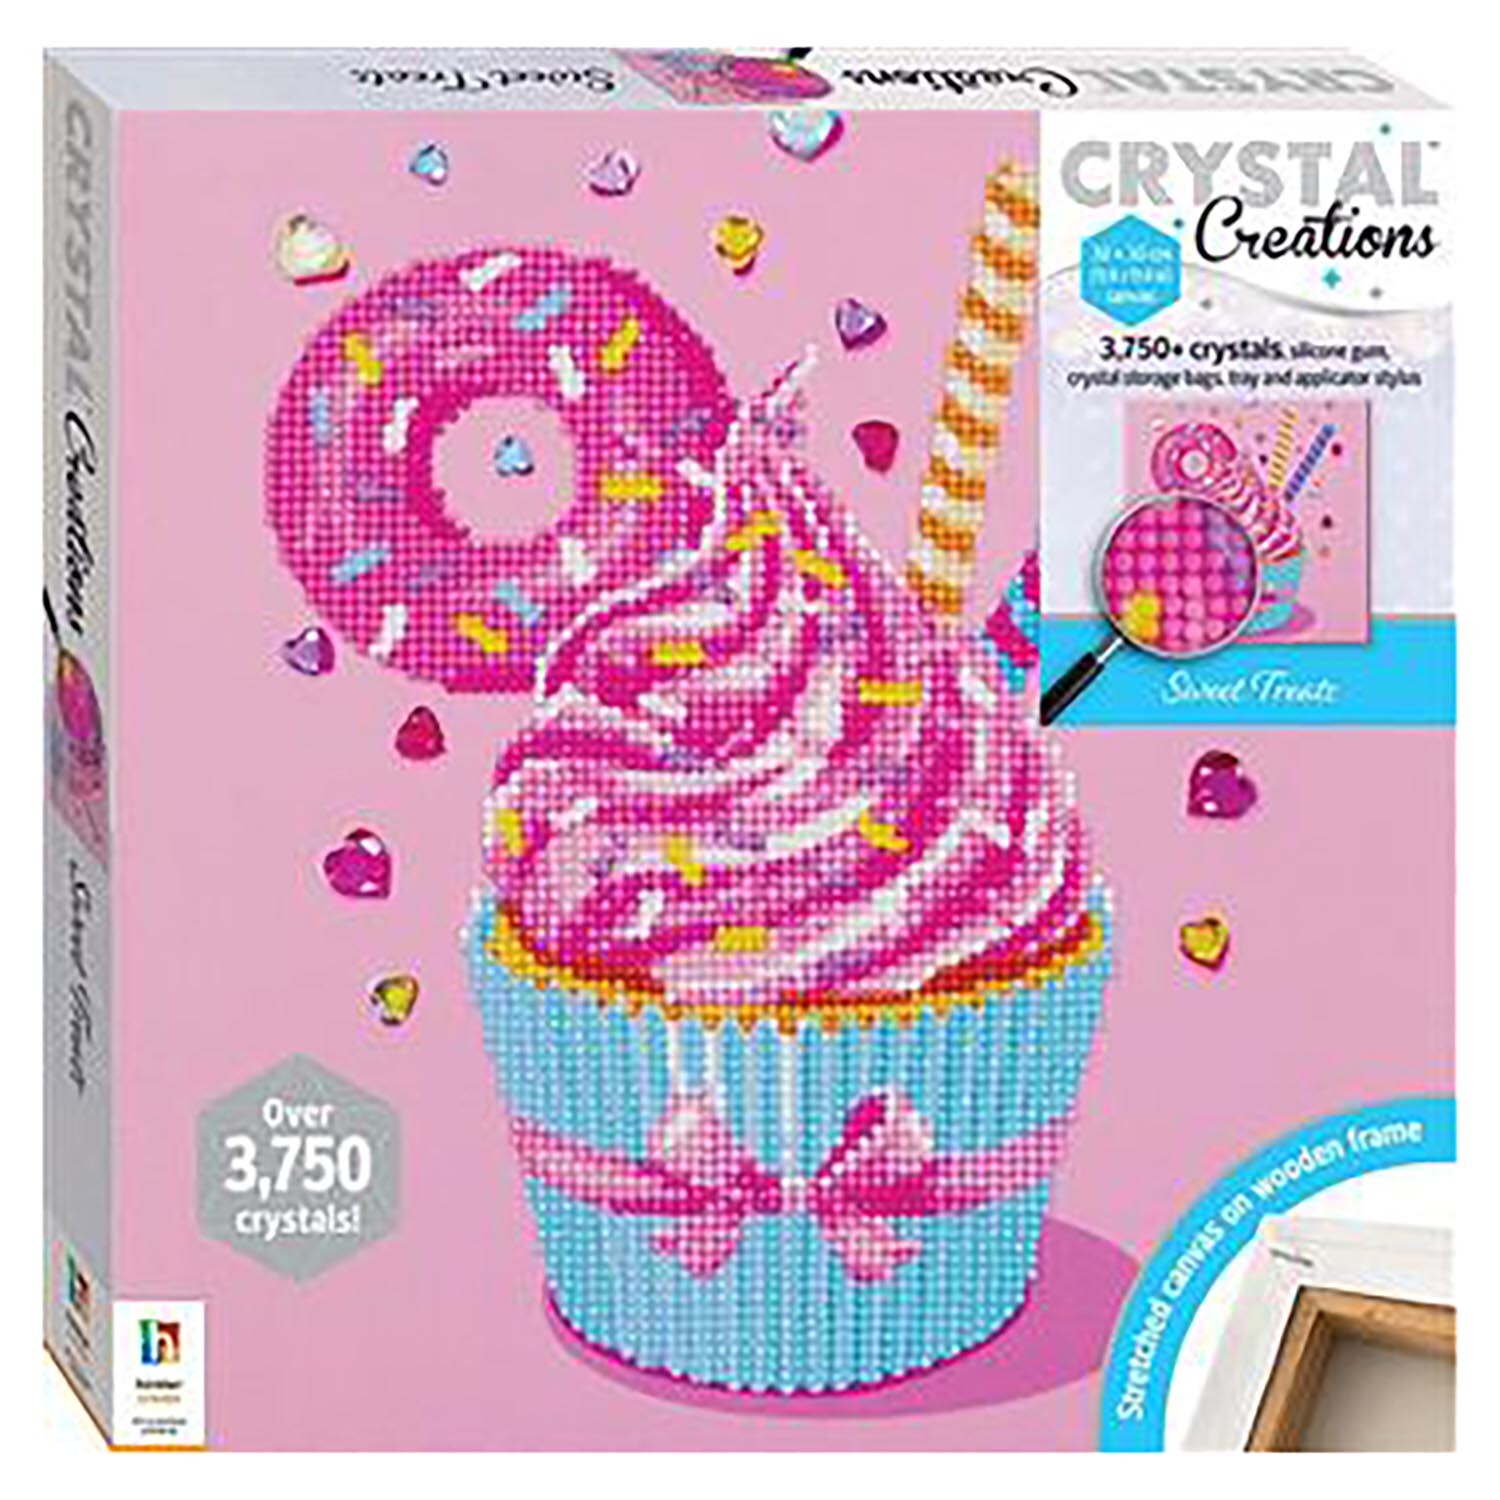 Hinkler Crystal Creations Canvas Assortment Image 1